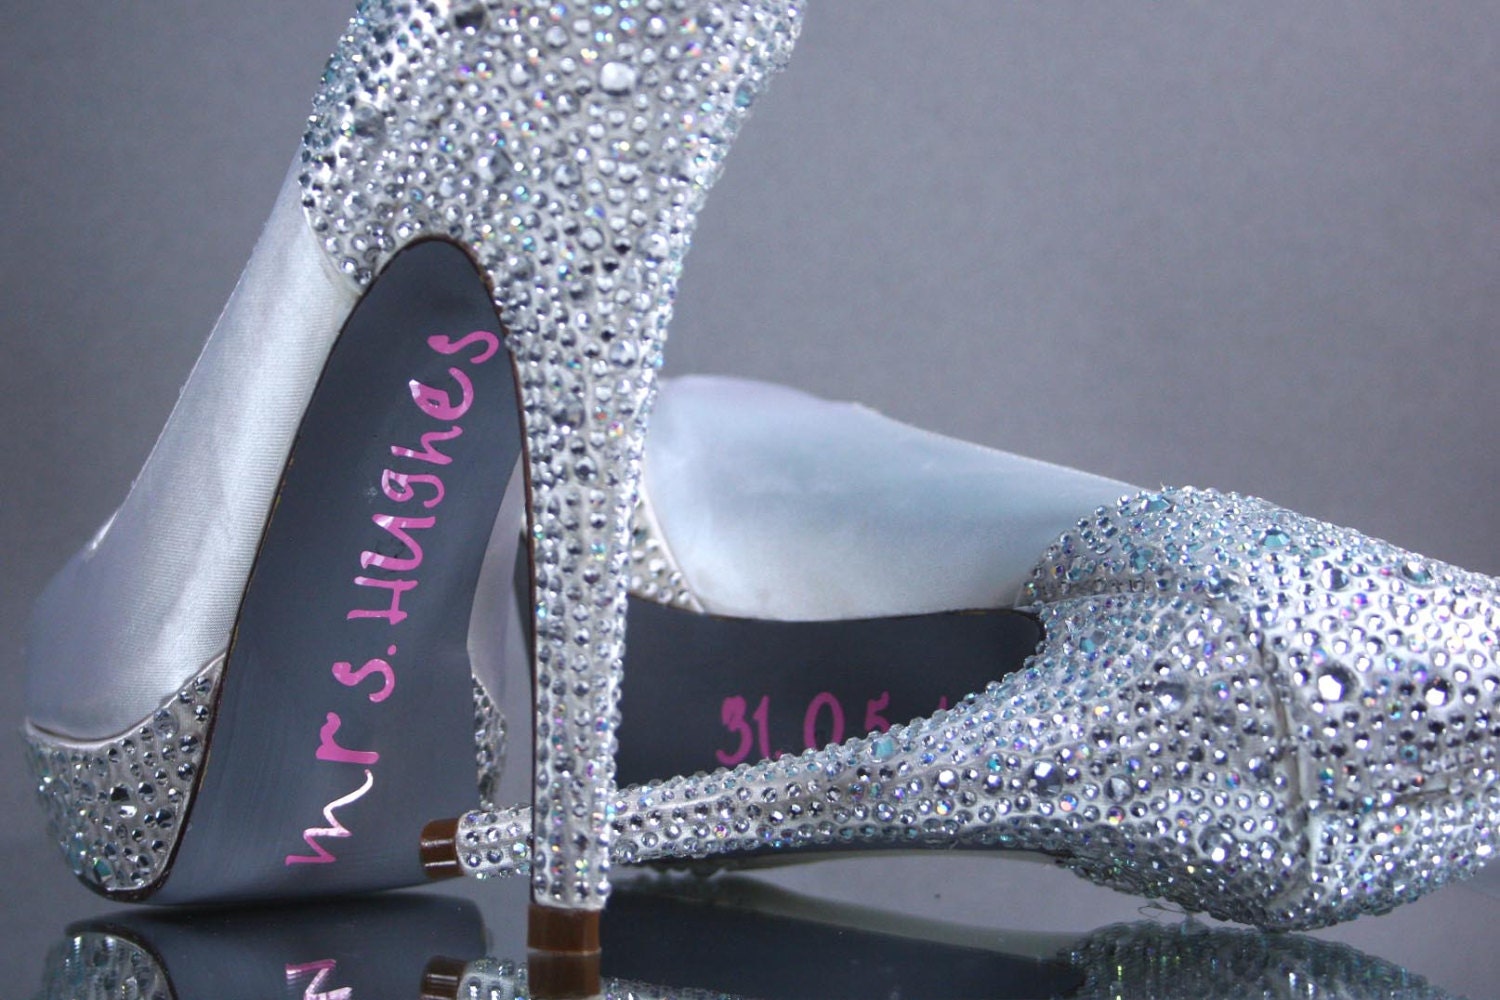 Wedding Shoes -- Ivory Platform Peep Toe Wedding Shoes with Rhinestone Heel & Platform, Gray Painted Sole and Pink Save the Date